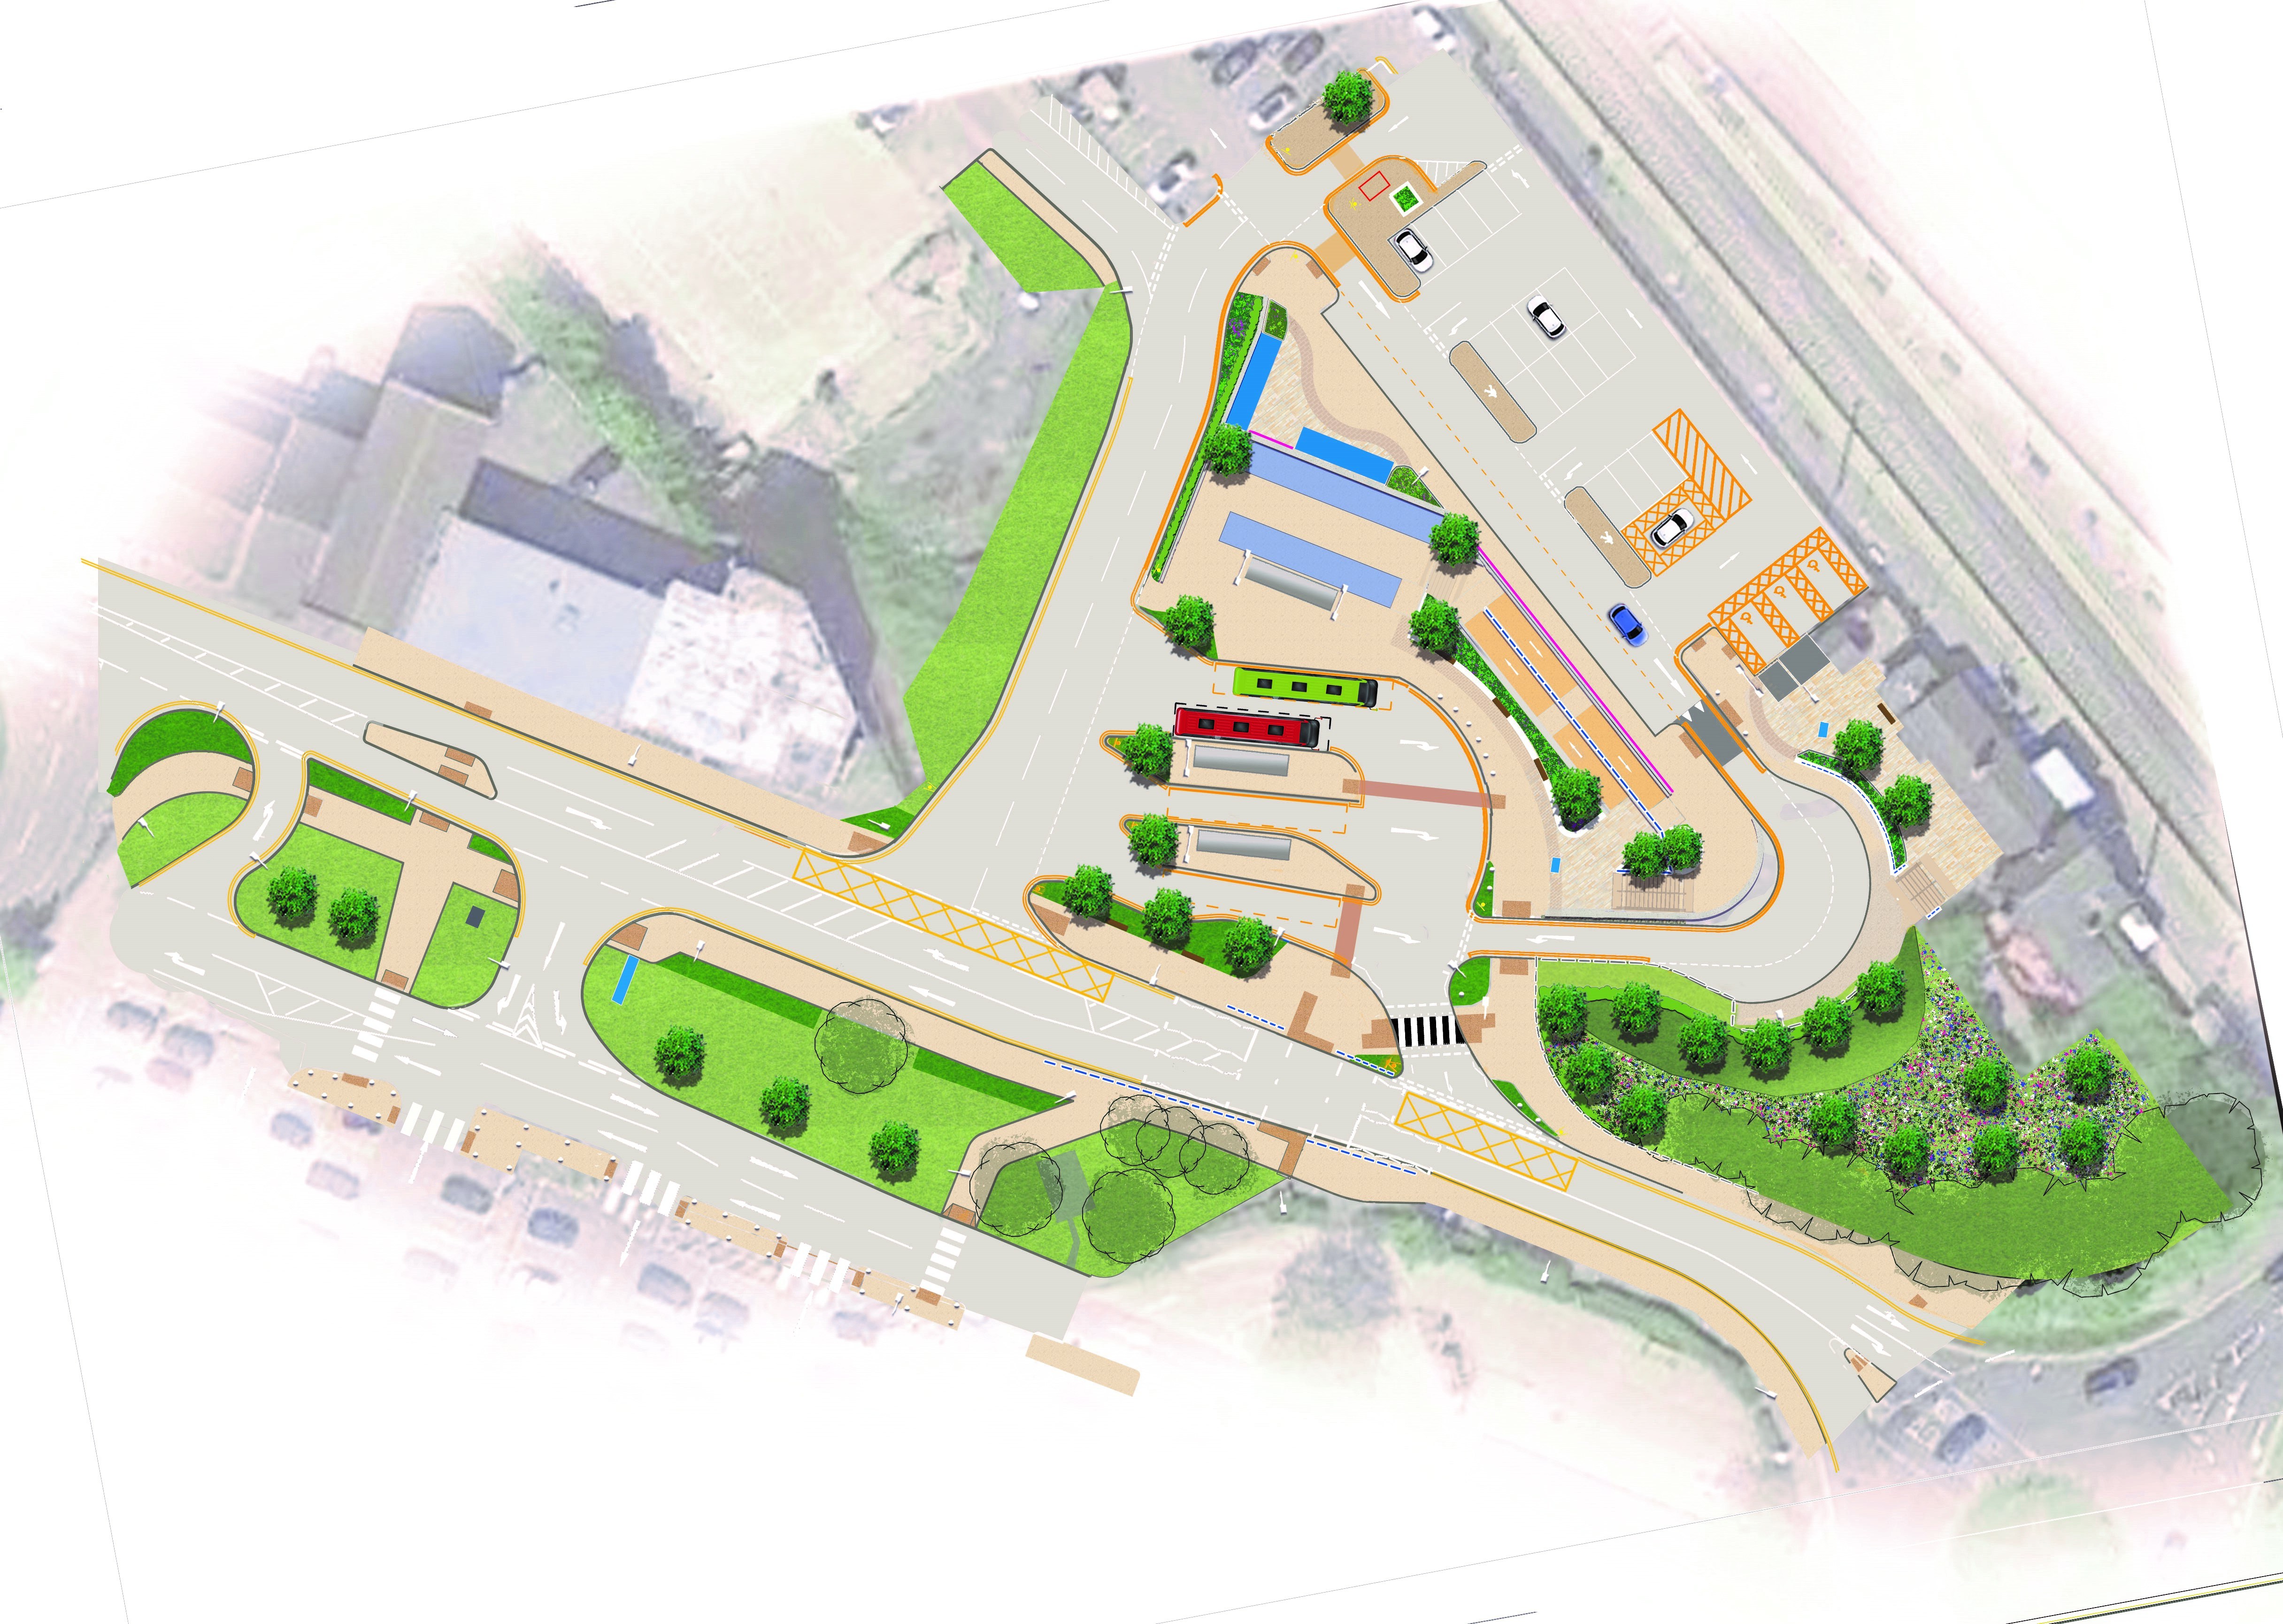 Flitwick Transport Interchange Moves One Step Closer to Construction Starting